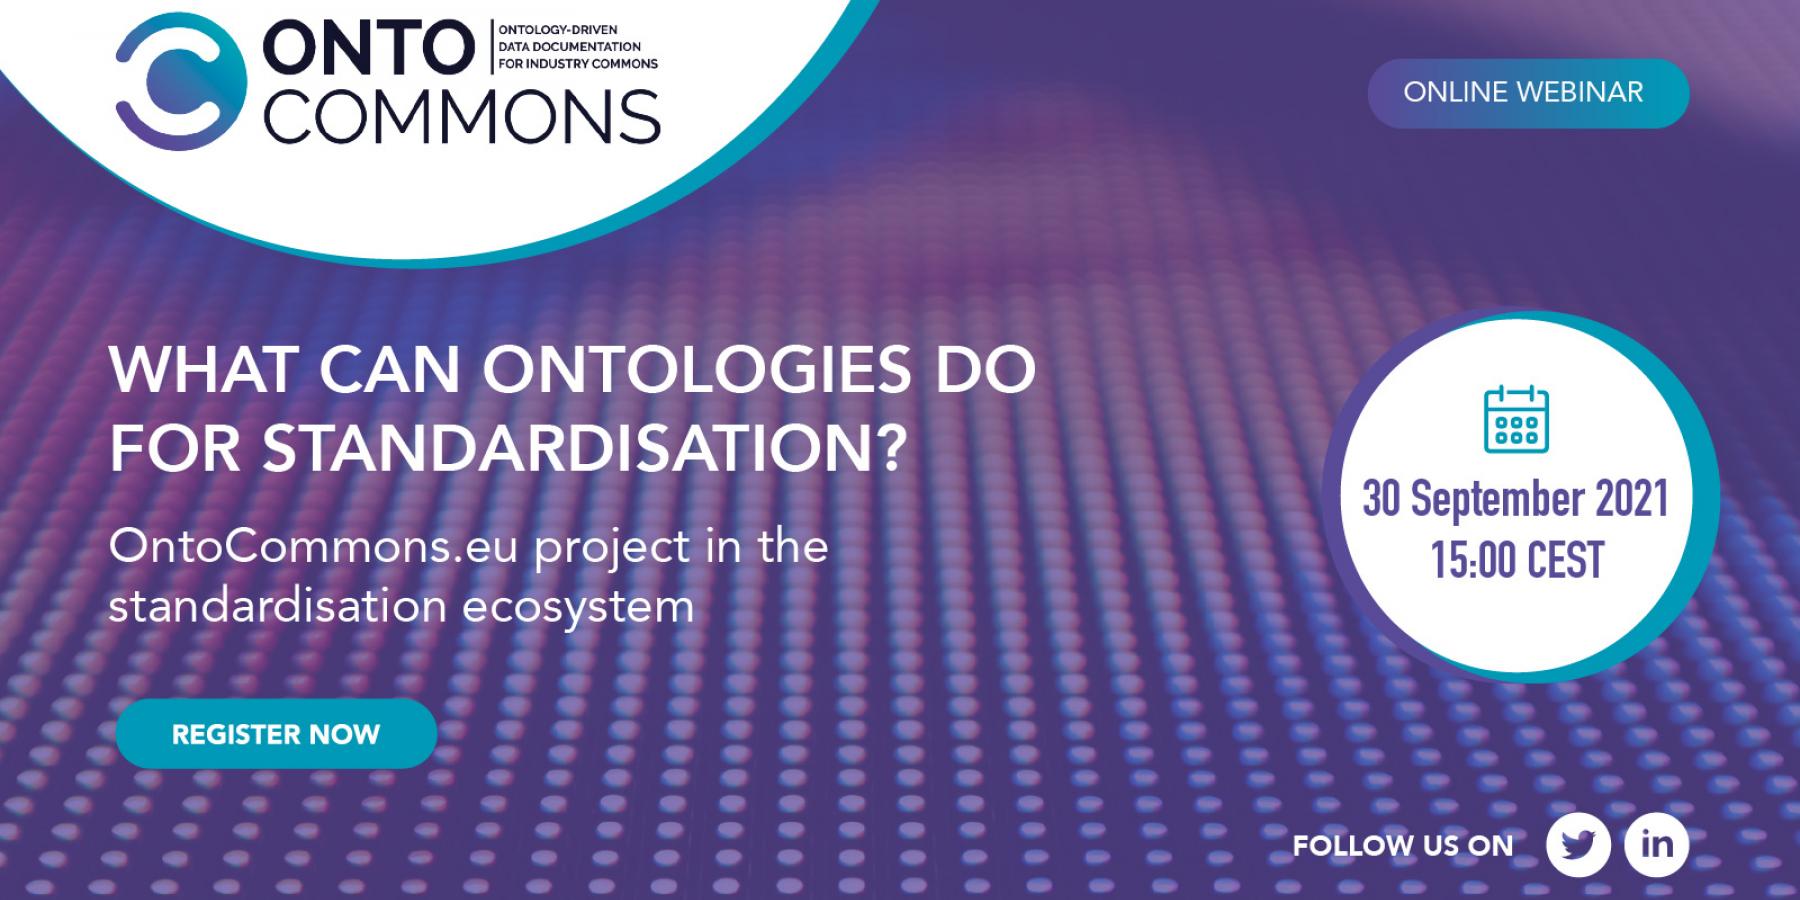 What can ontologies do for standardisation? OntoCommons.eu project in the standardisation ecosystem